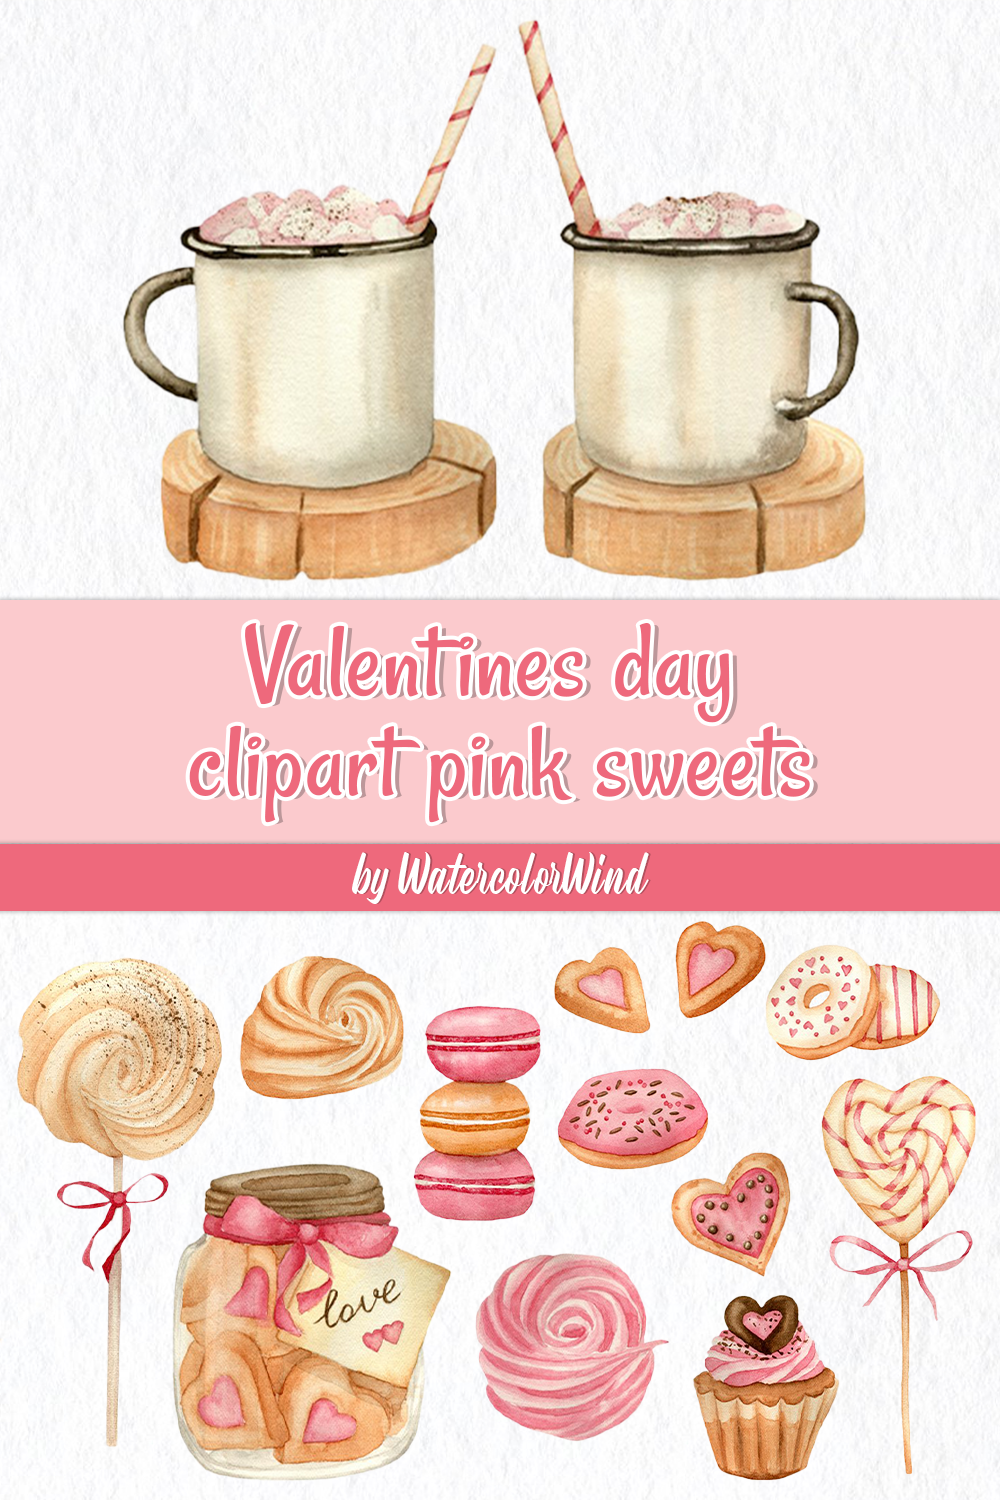 Valentines day clipart pink sweets of pinterest.